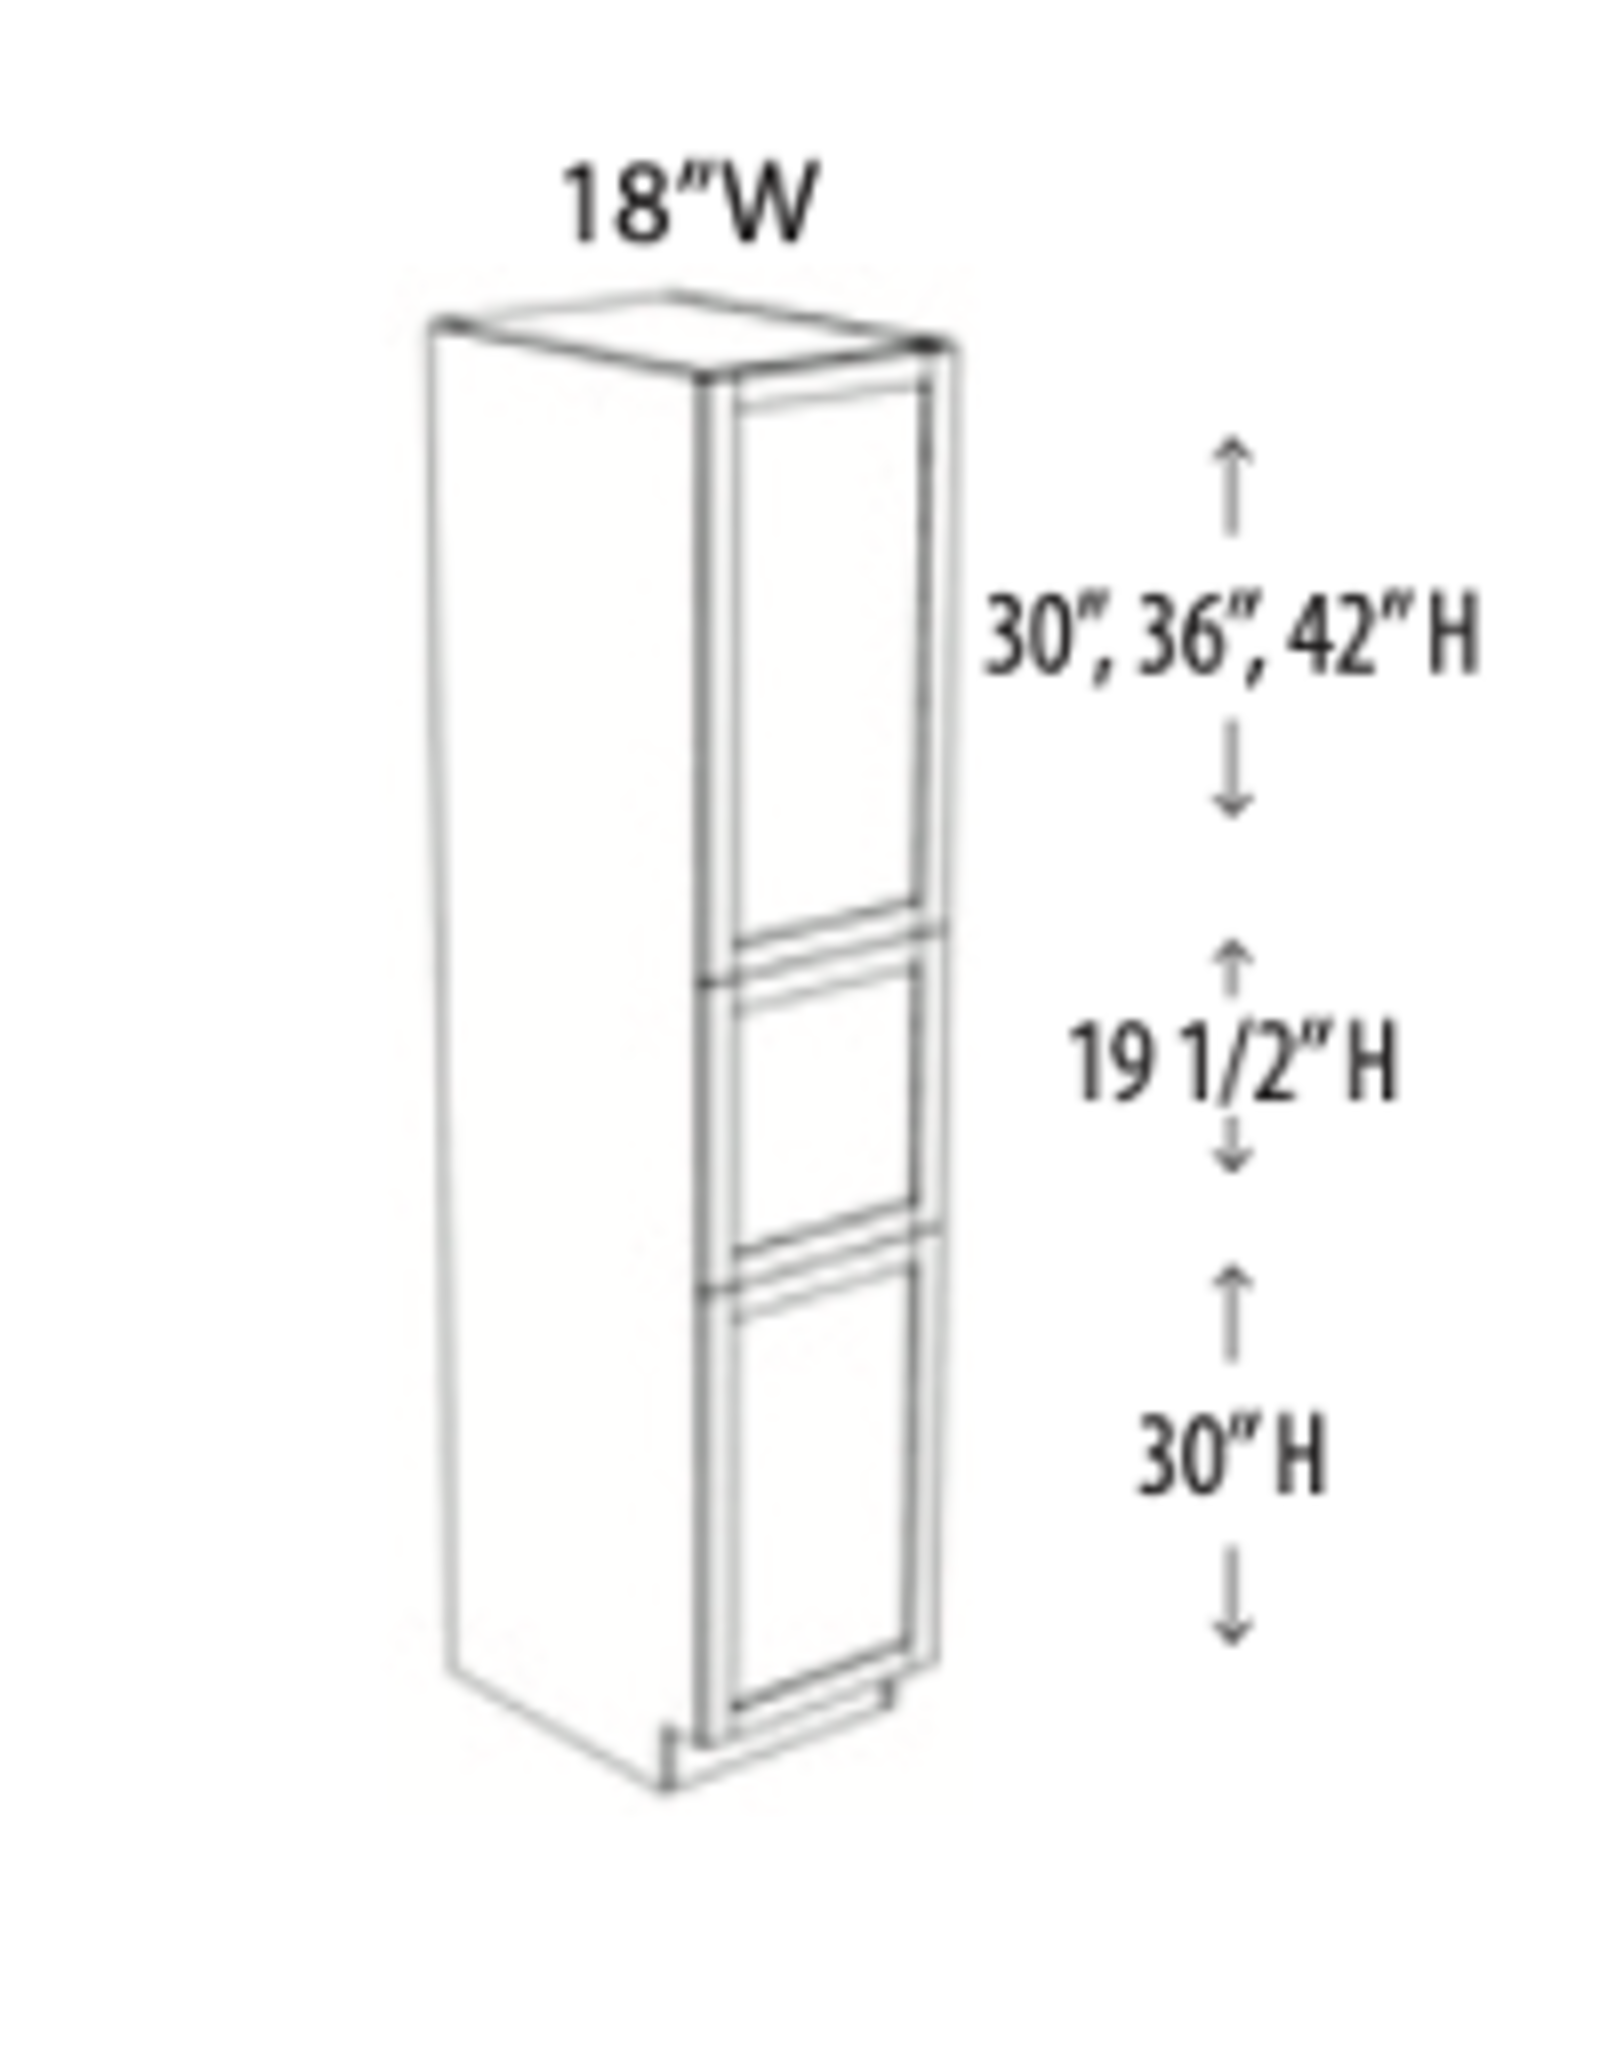 Classic Brand Cabinetry PANTRY CABINET - 3 WOOD DOORS  - 2 SHELVES